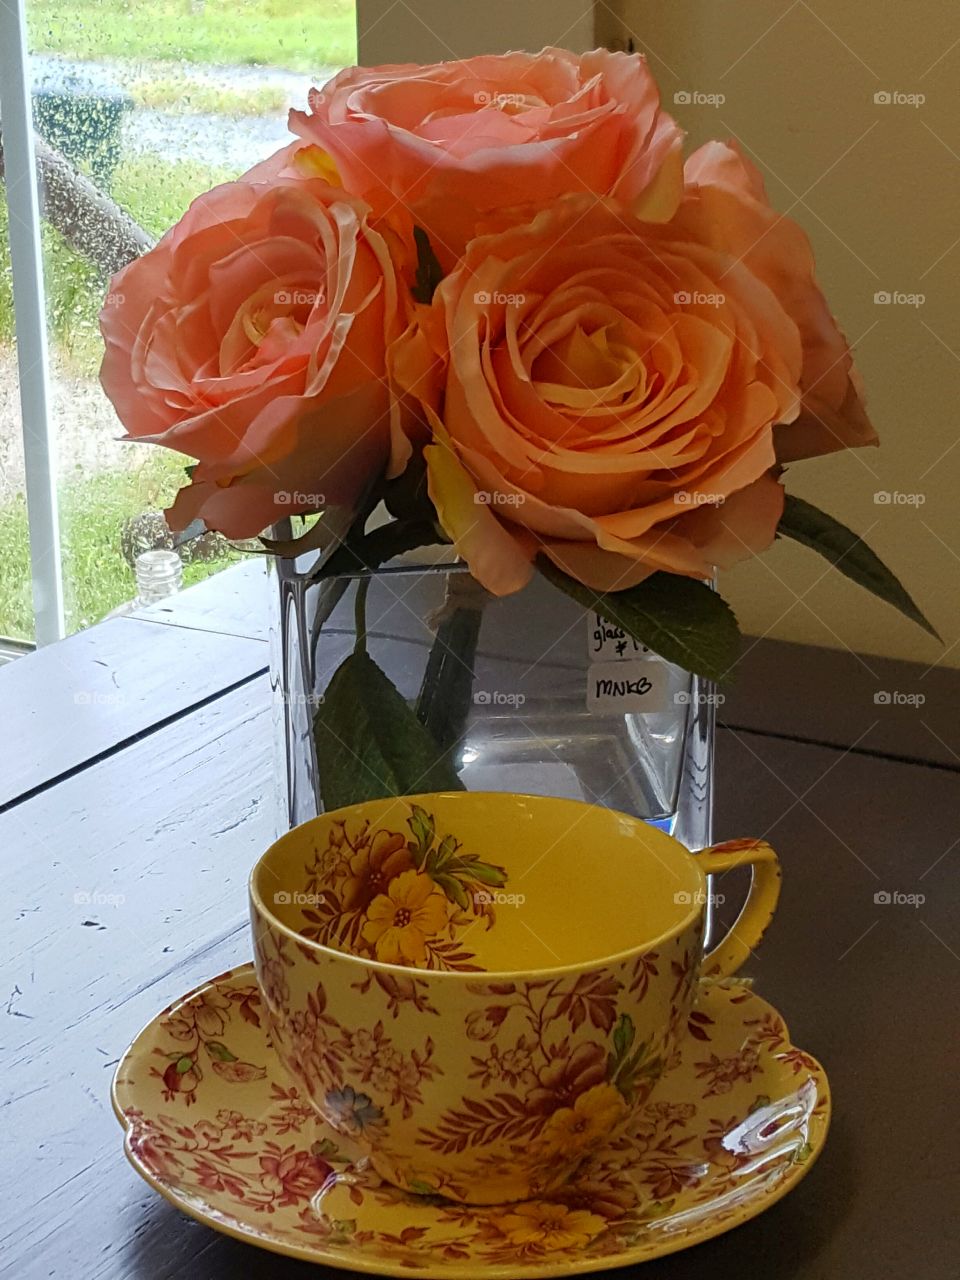 cup of tea on rainy day